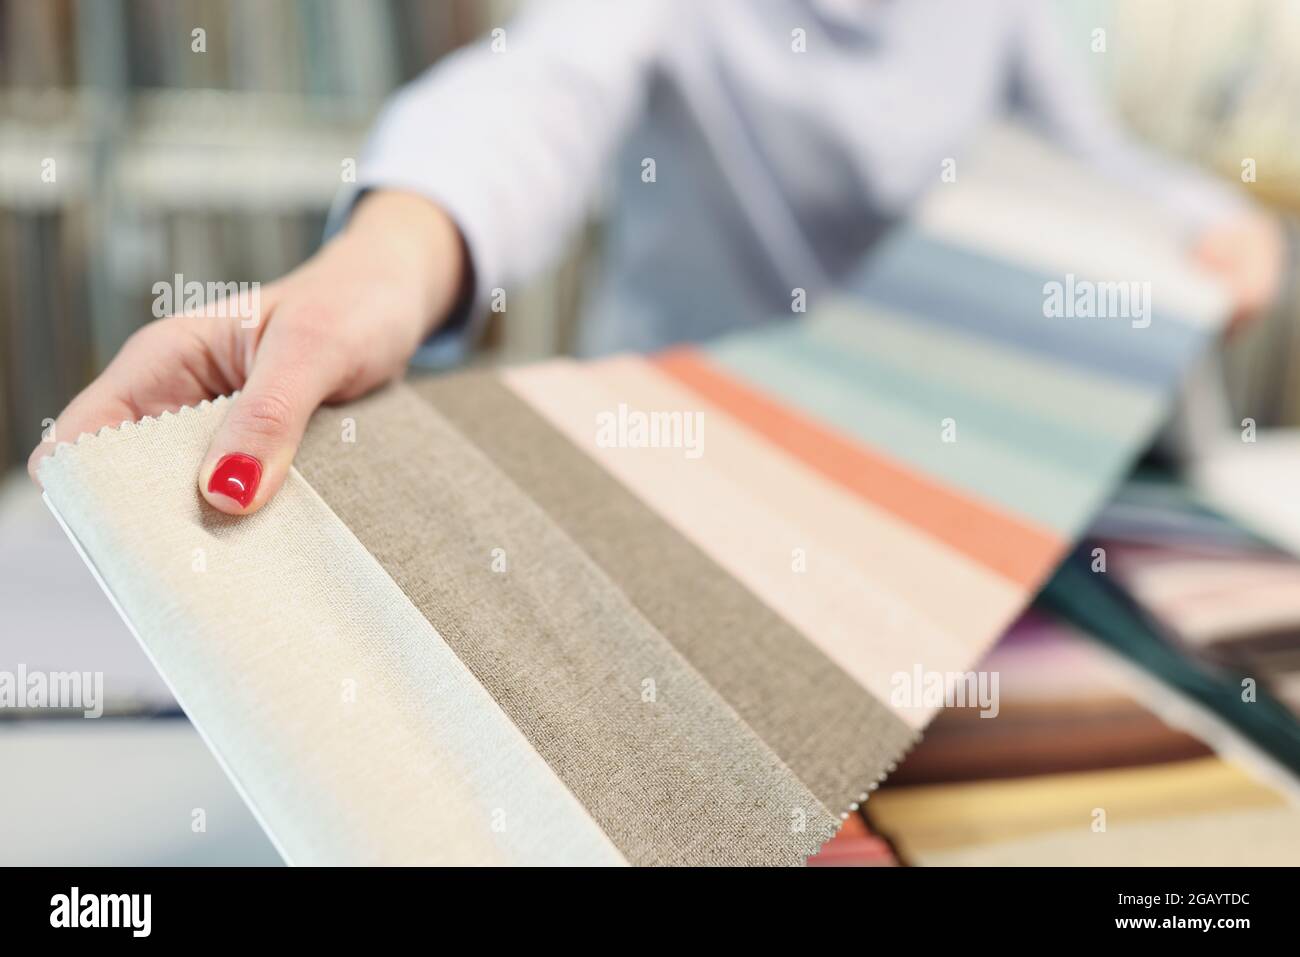 Colorful fabric catalog on seamstress or dressmaker work table Stock Photo